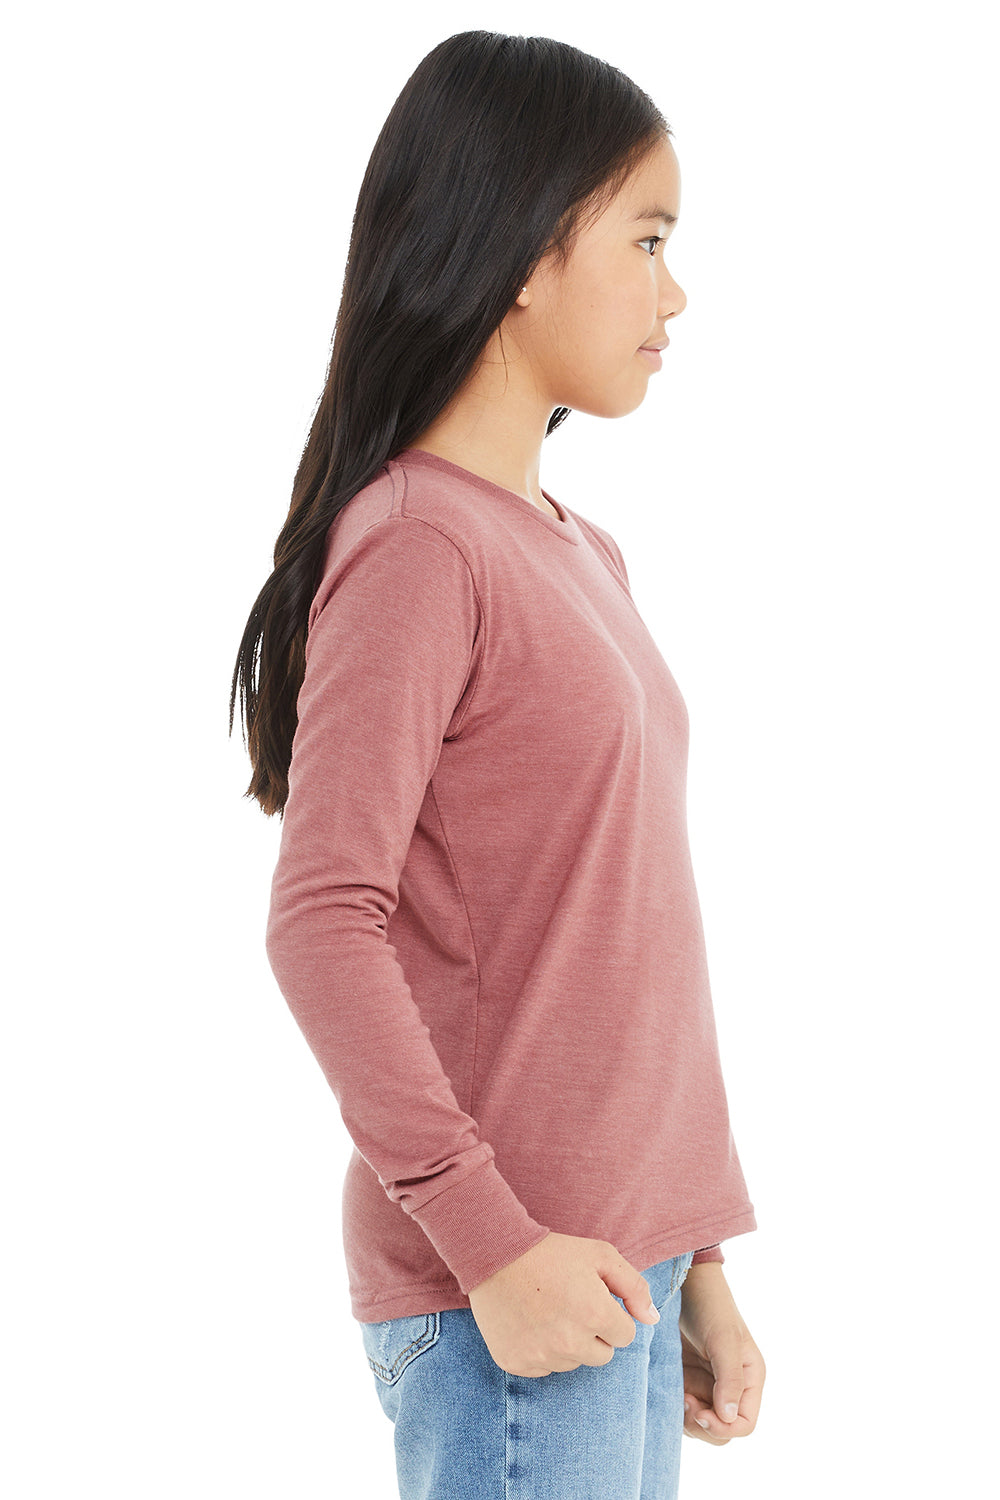 Bella + Canvas 3501Y Youth Jersey Long Sleeve Crewneck T-Shirt Heather Mauve Model Side